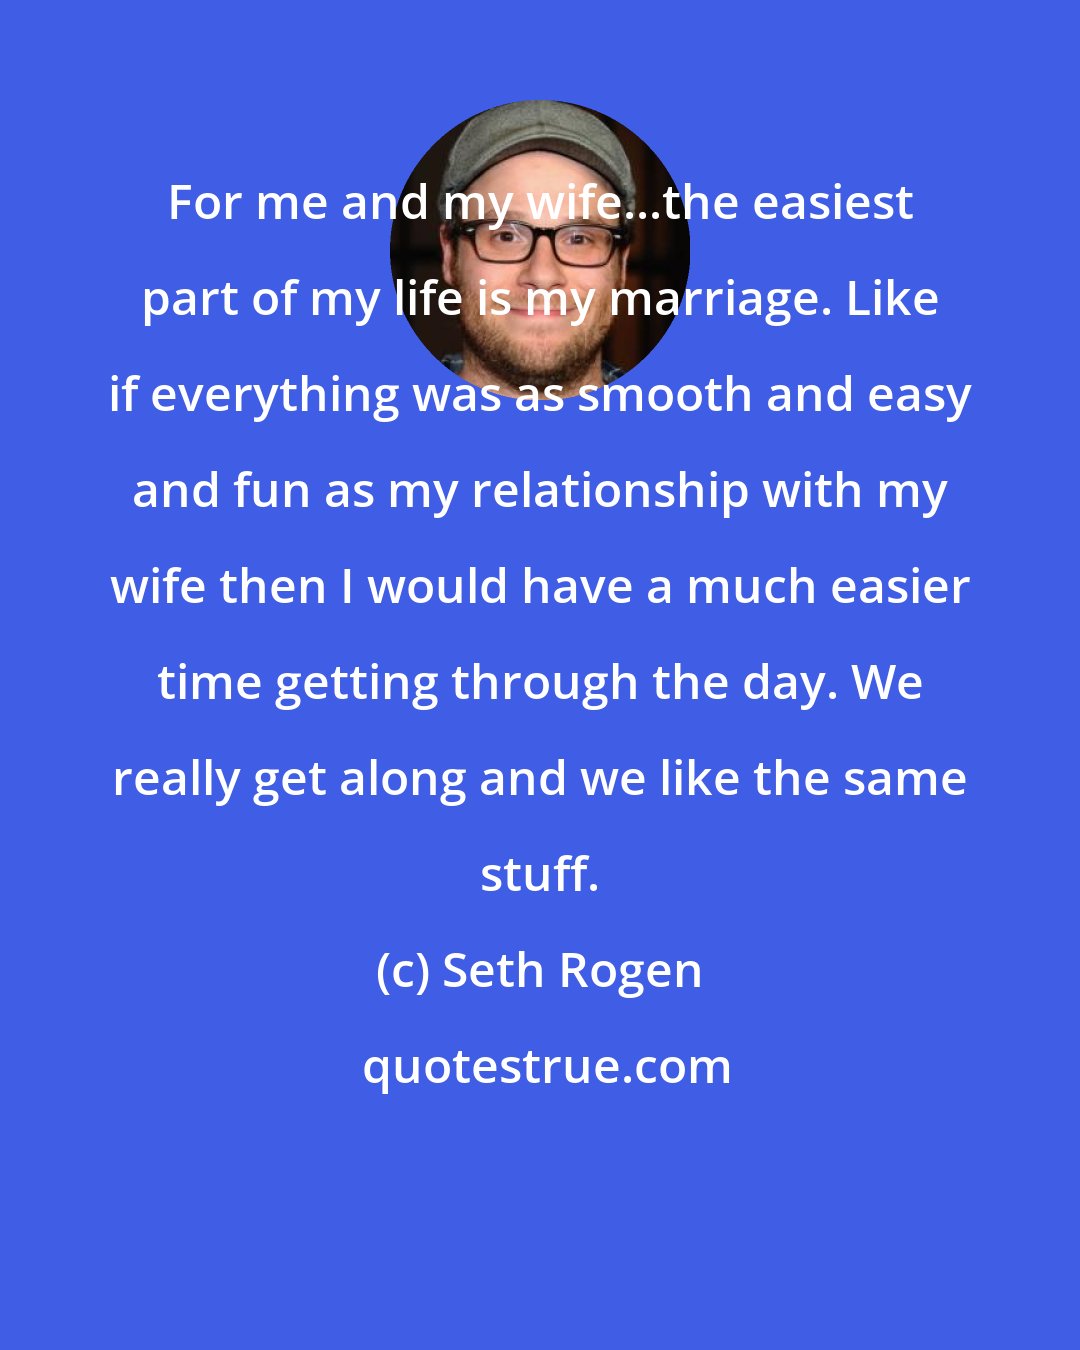 Seth Rogen: For me and my wife...the easiest part of my life is my marriage. Like if everything was as smooth and easy and fun as my relationship with my wife then I would have a much easier time getting through the day. We really get along and we like the same stuff.